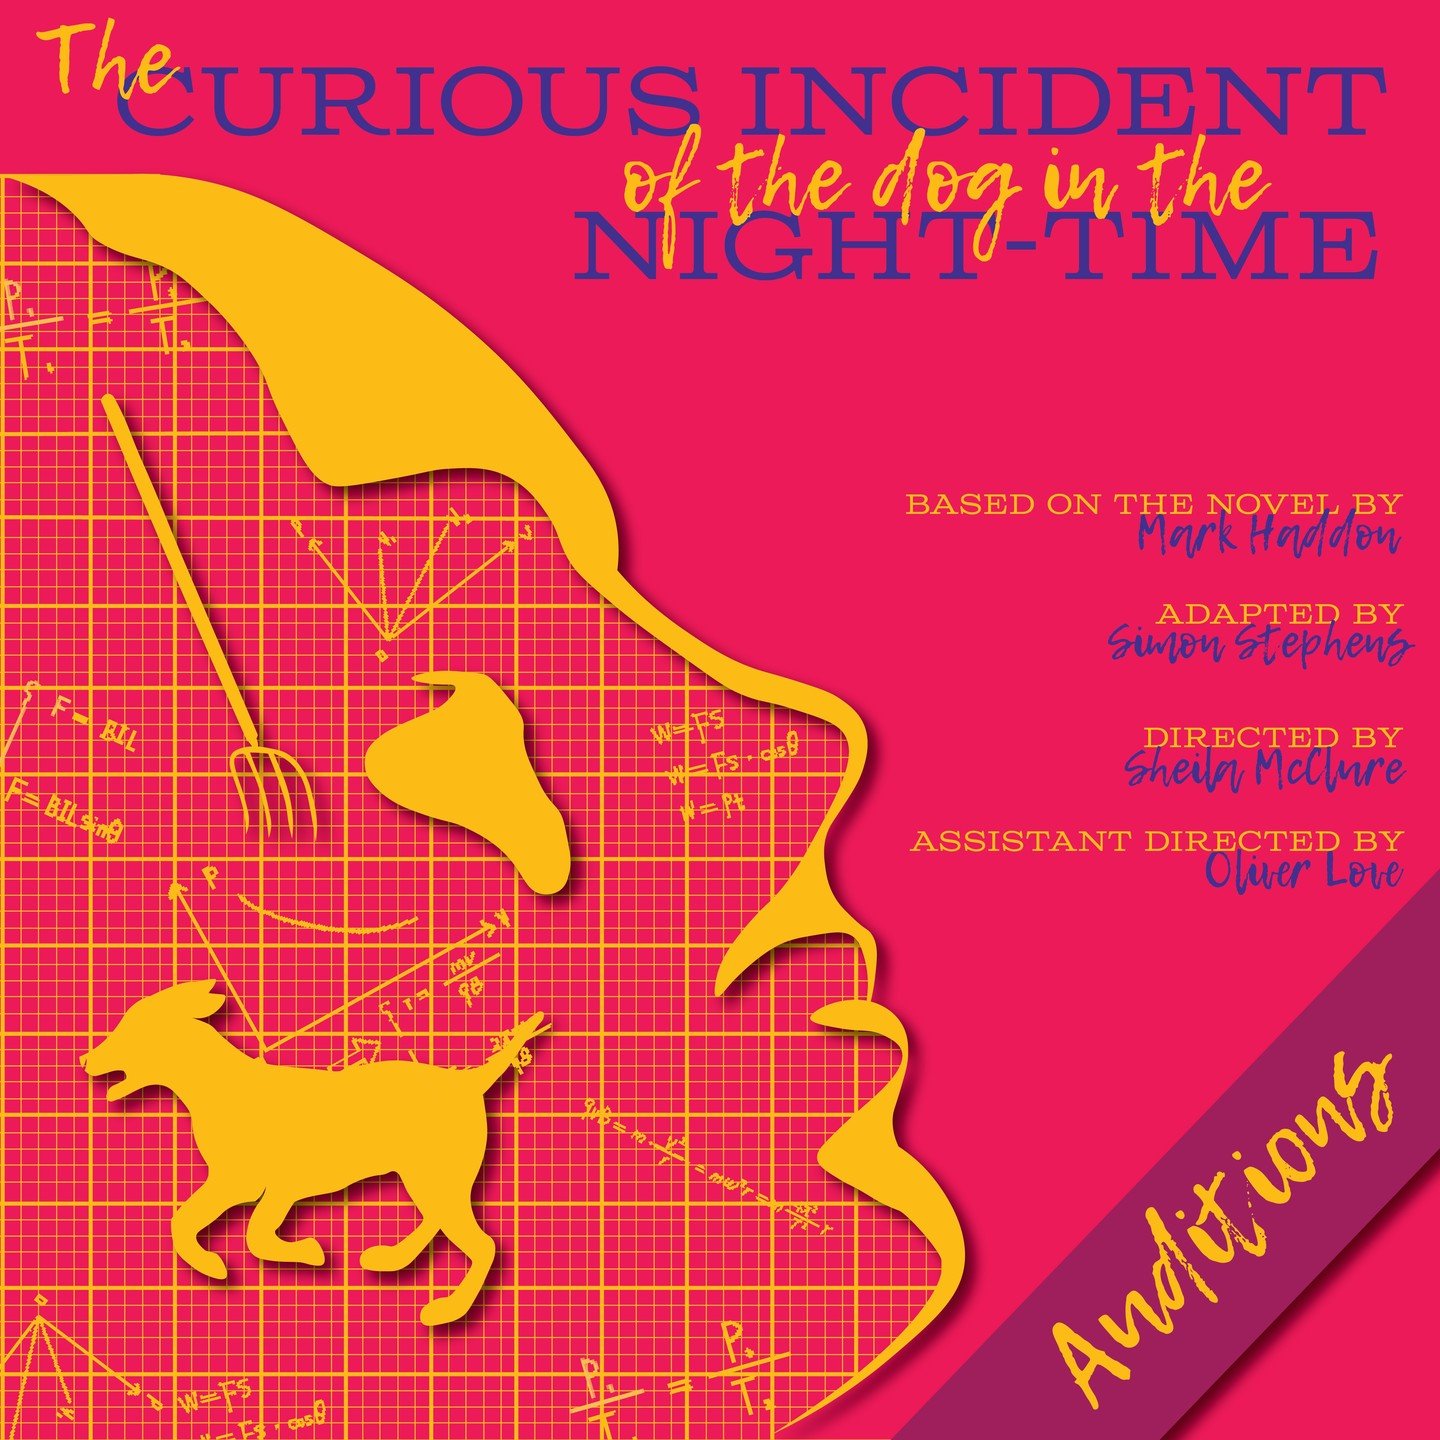 📌 Announcing auditions for THE CURIOUS INCIDENT OF THE DOG IN THE NIGHT-TIME! 📌

Saturday, April 27 &amp; Sunday, April 28 from 11am-2pm at The Empty Space

Visit us at esonline.org/auditions for a complete character breakdown, to make an appointme